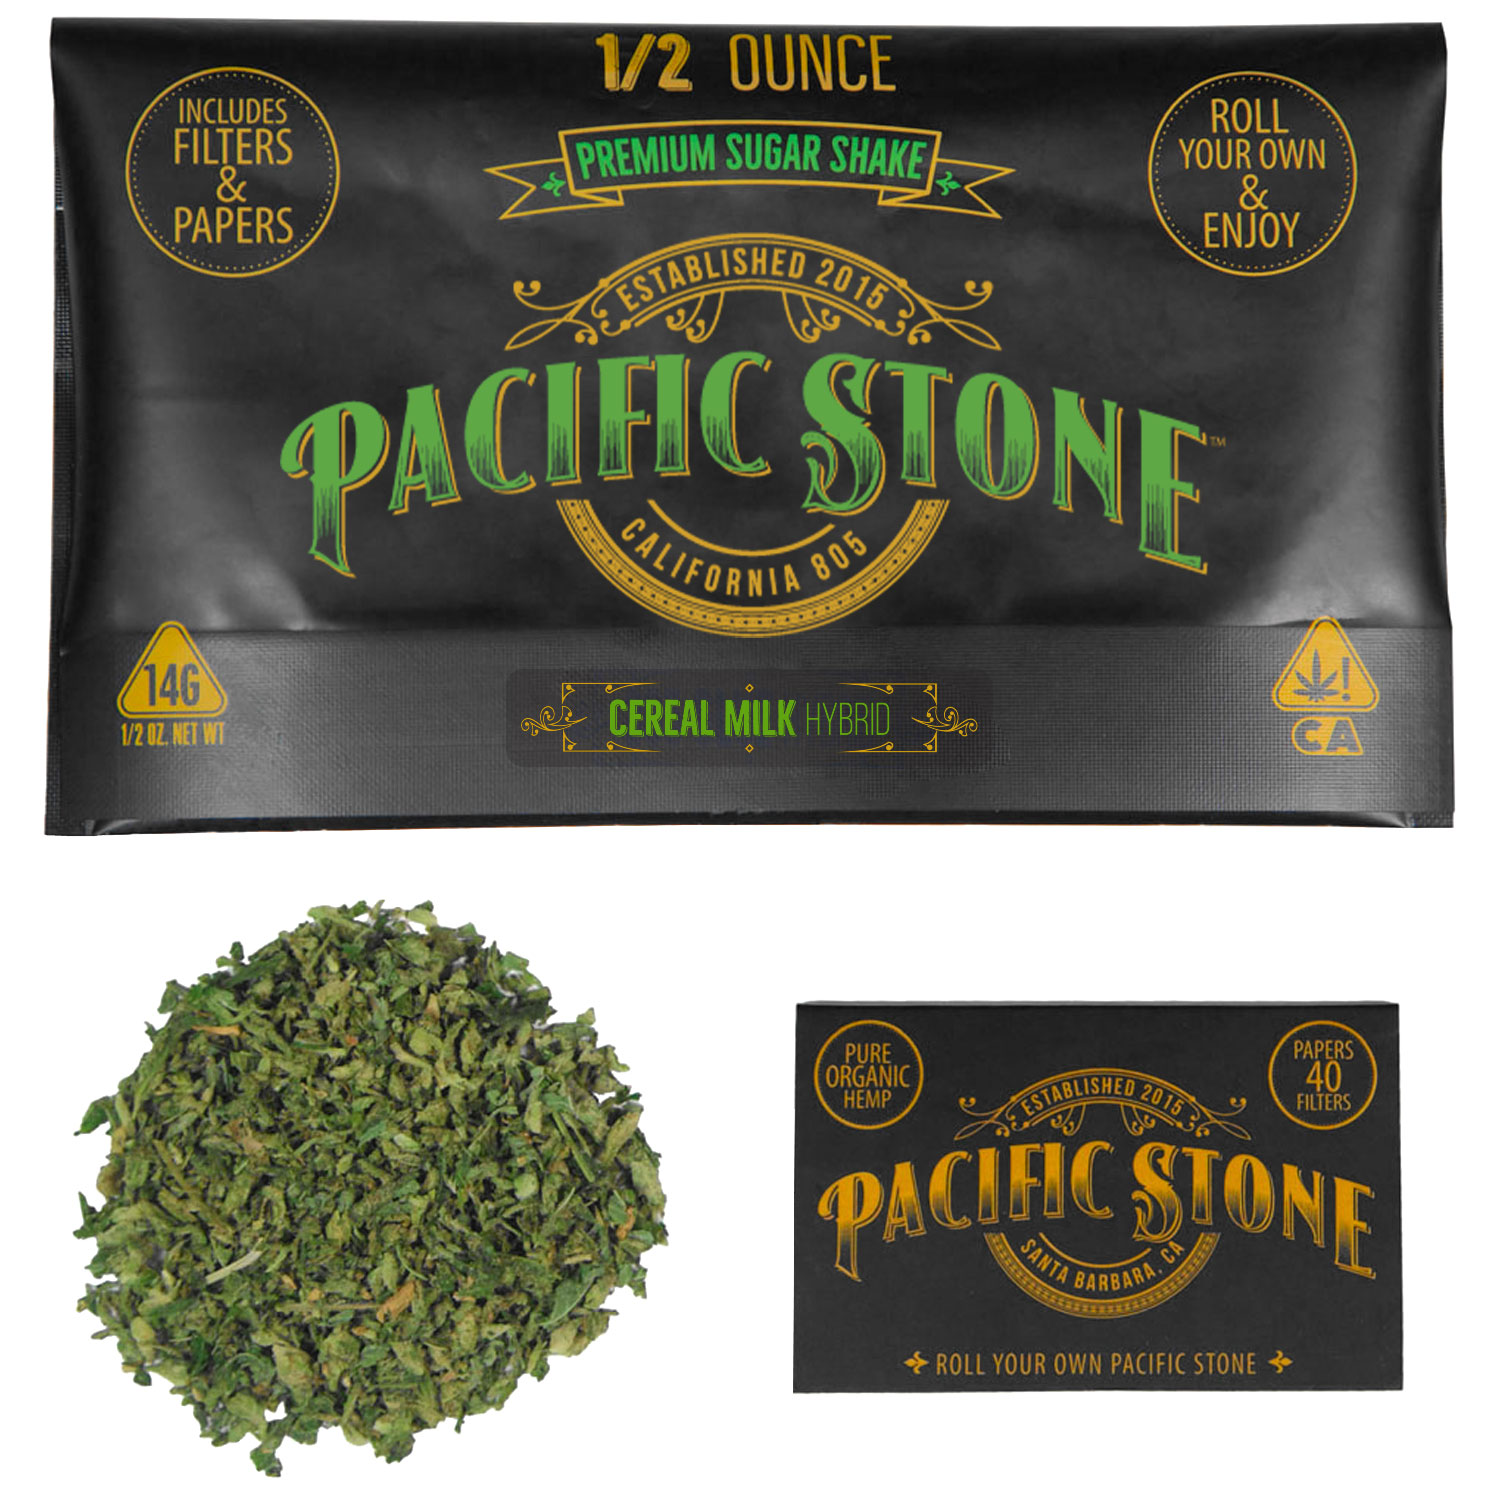 A photograph of Pacific Stone Roll Your Own Sugar Shake 14.0g Pouch Hybrid Cereal Milk